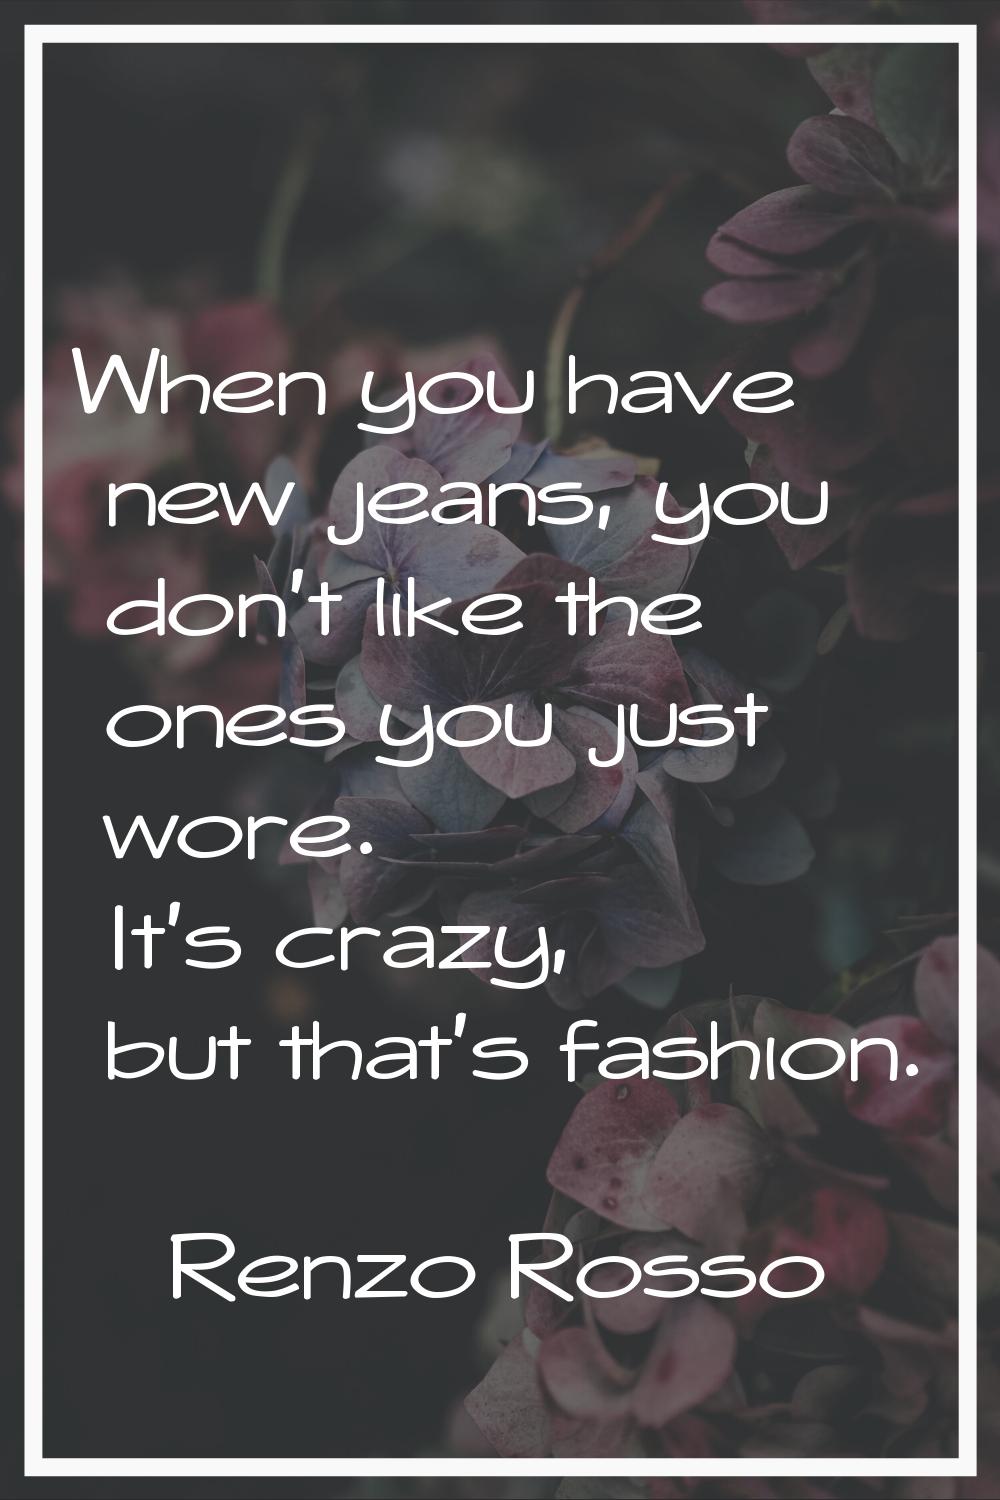 When you have new jeans, you don't like the ones you just wore. It's crazy, but that's fashion.